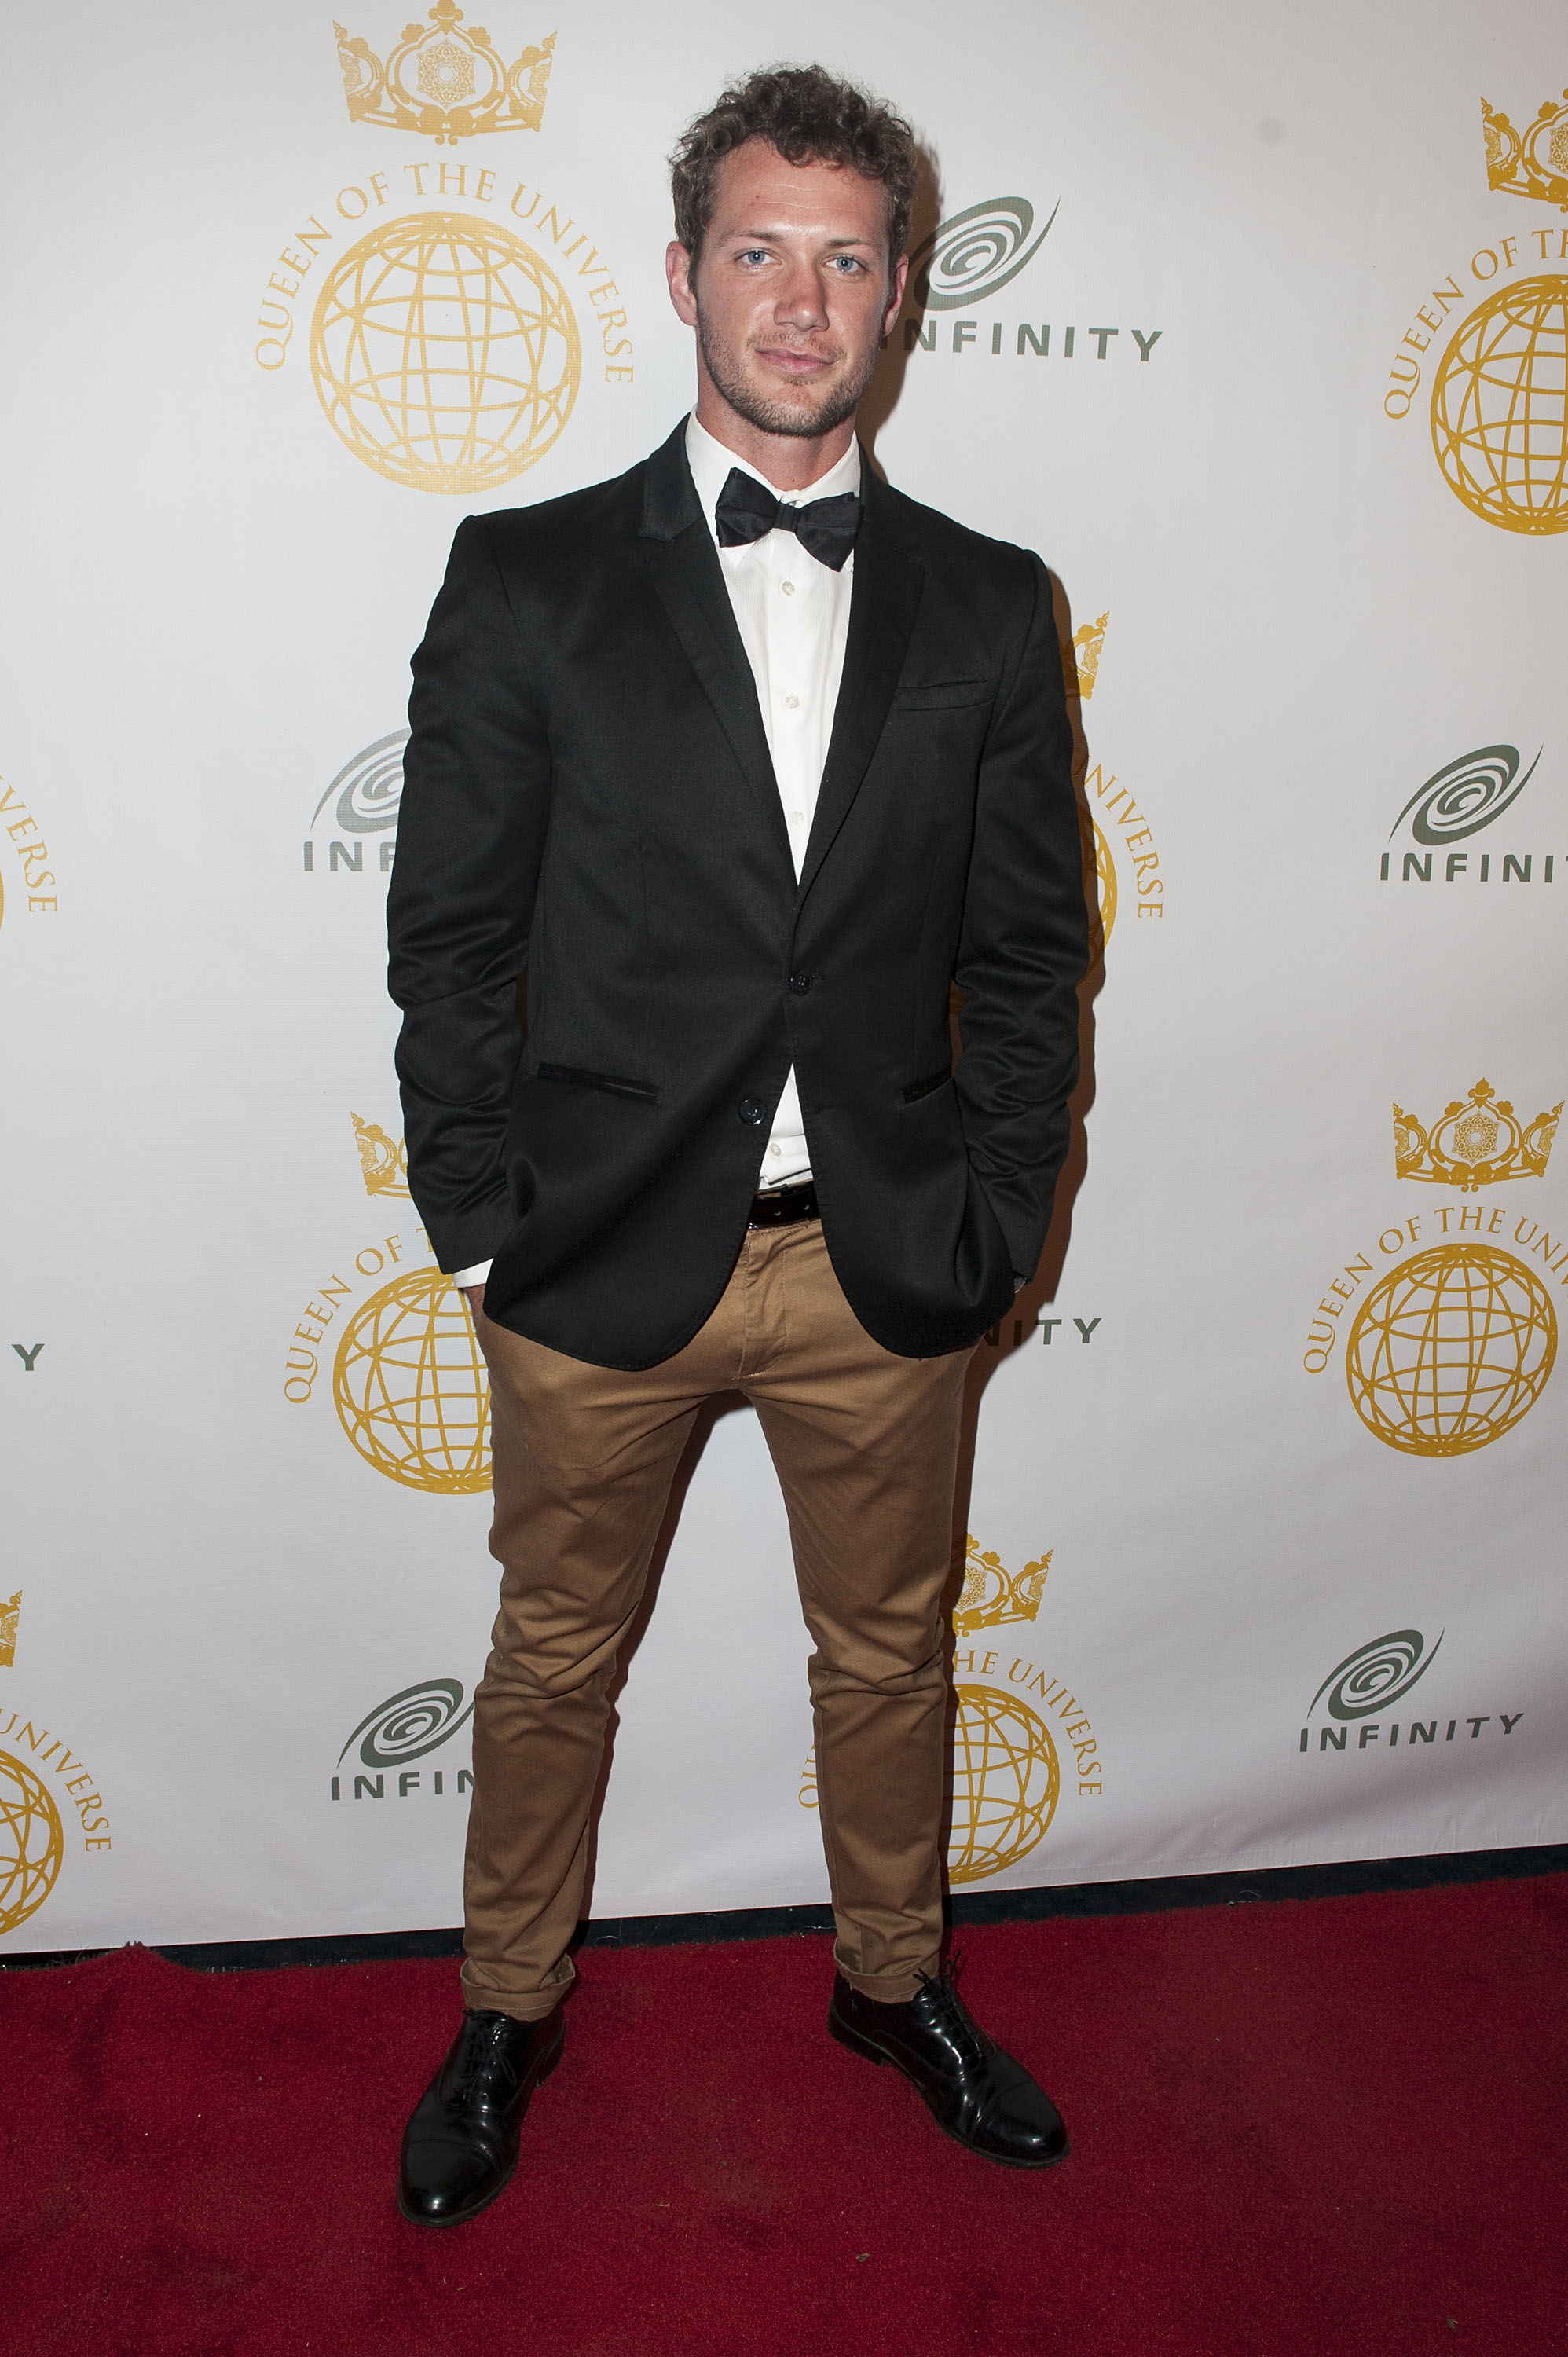 Johnny Wactor at the Queen of the Universe International Beauty Pageant in California in 2014 | Source: Getty Images